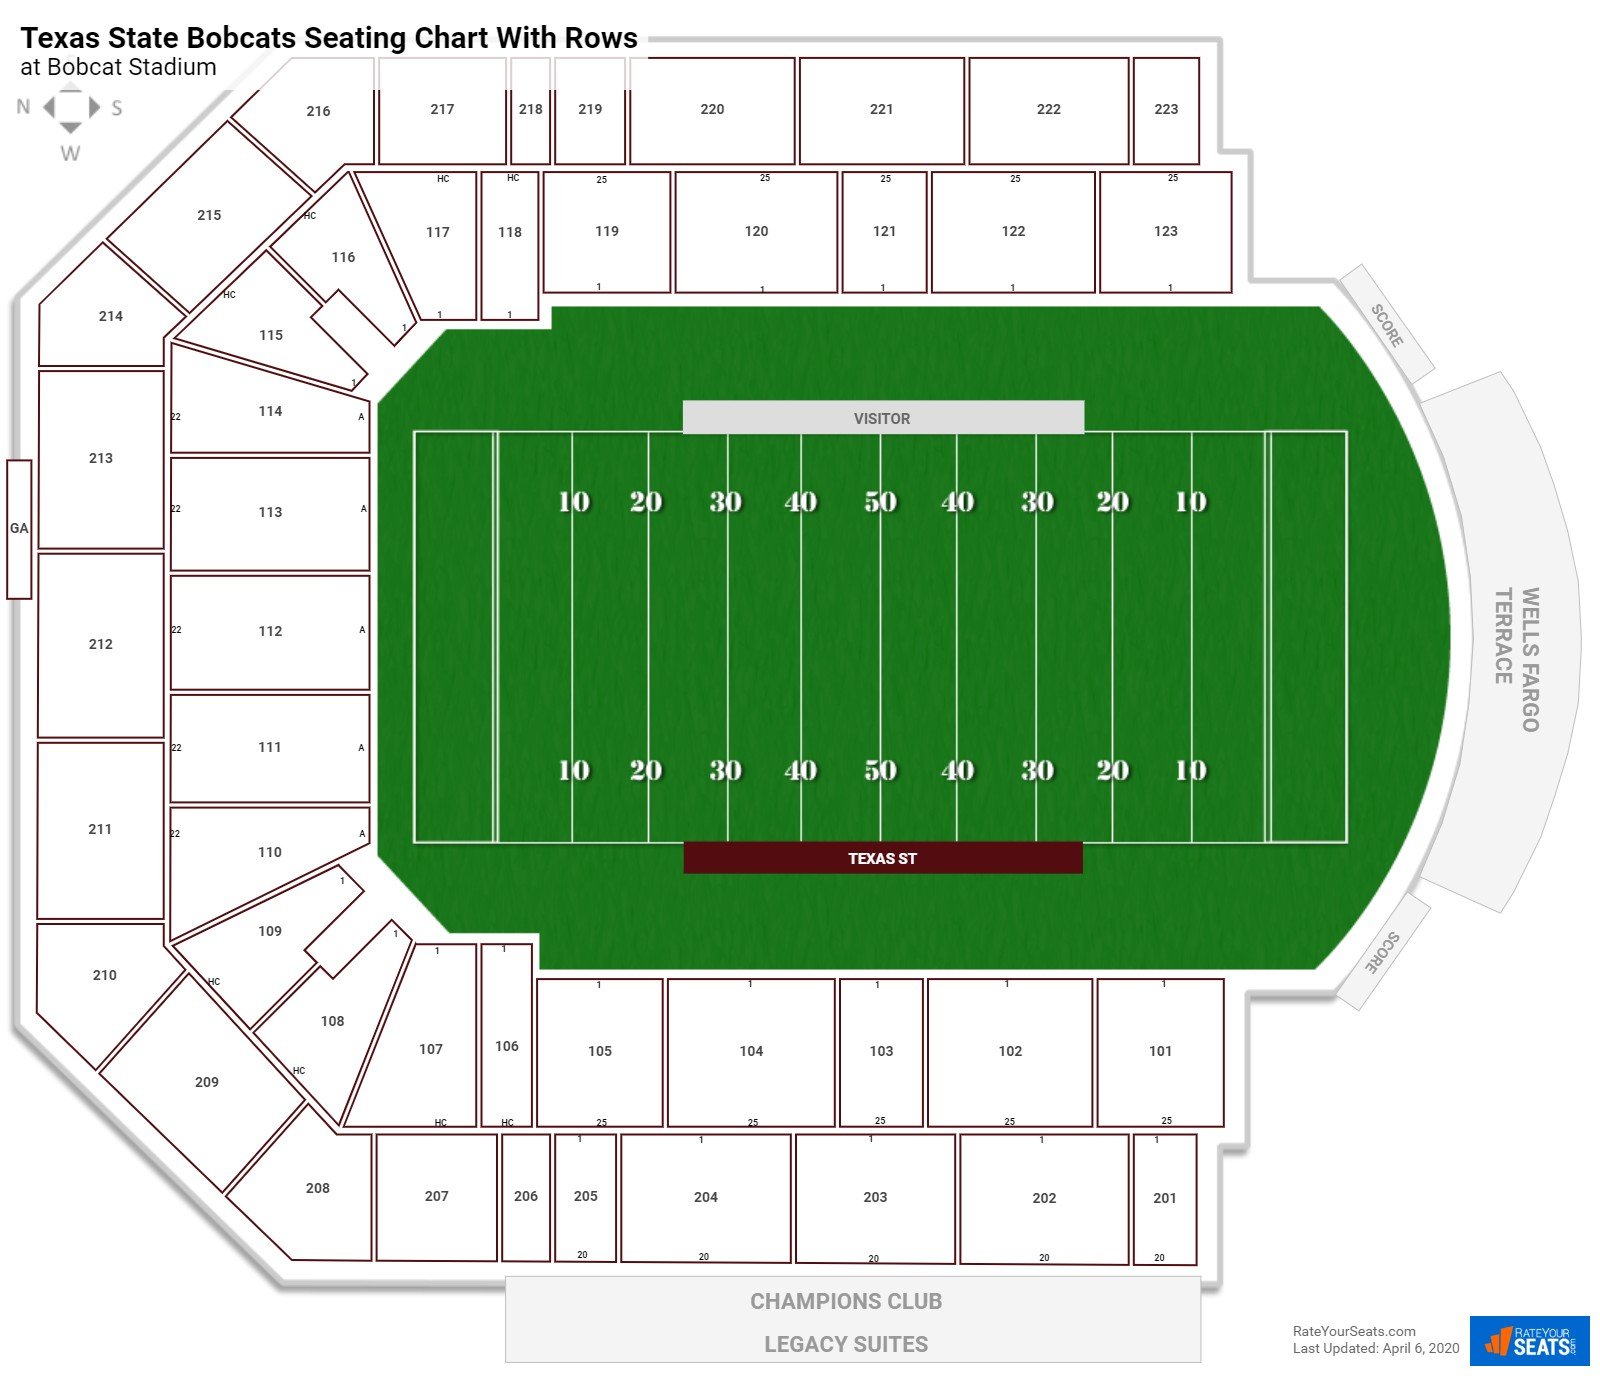 Bobcat Stadium seating chart with row numbers